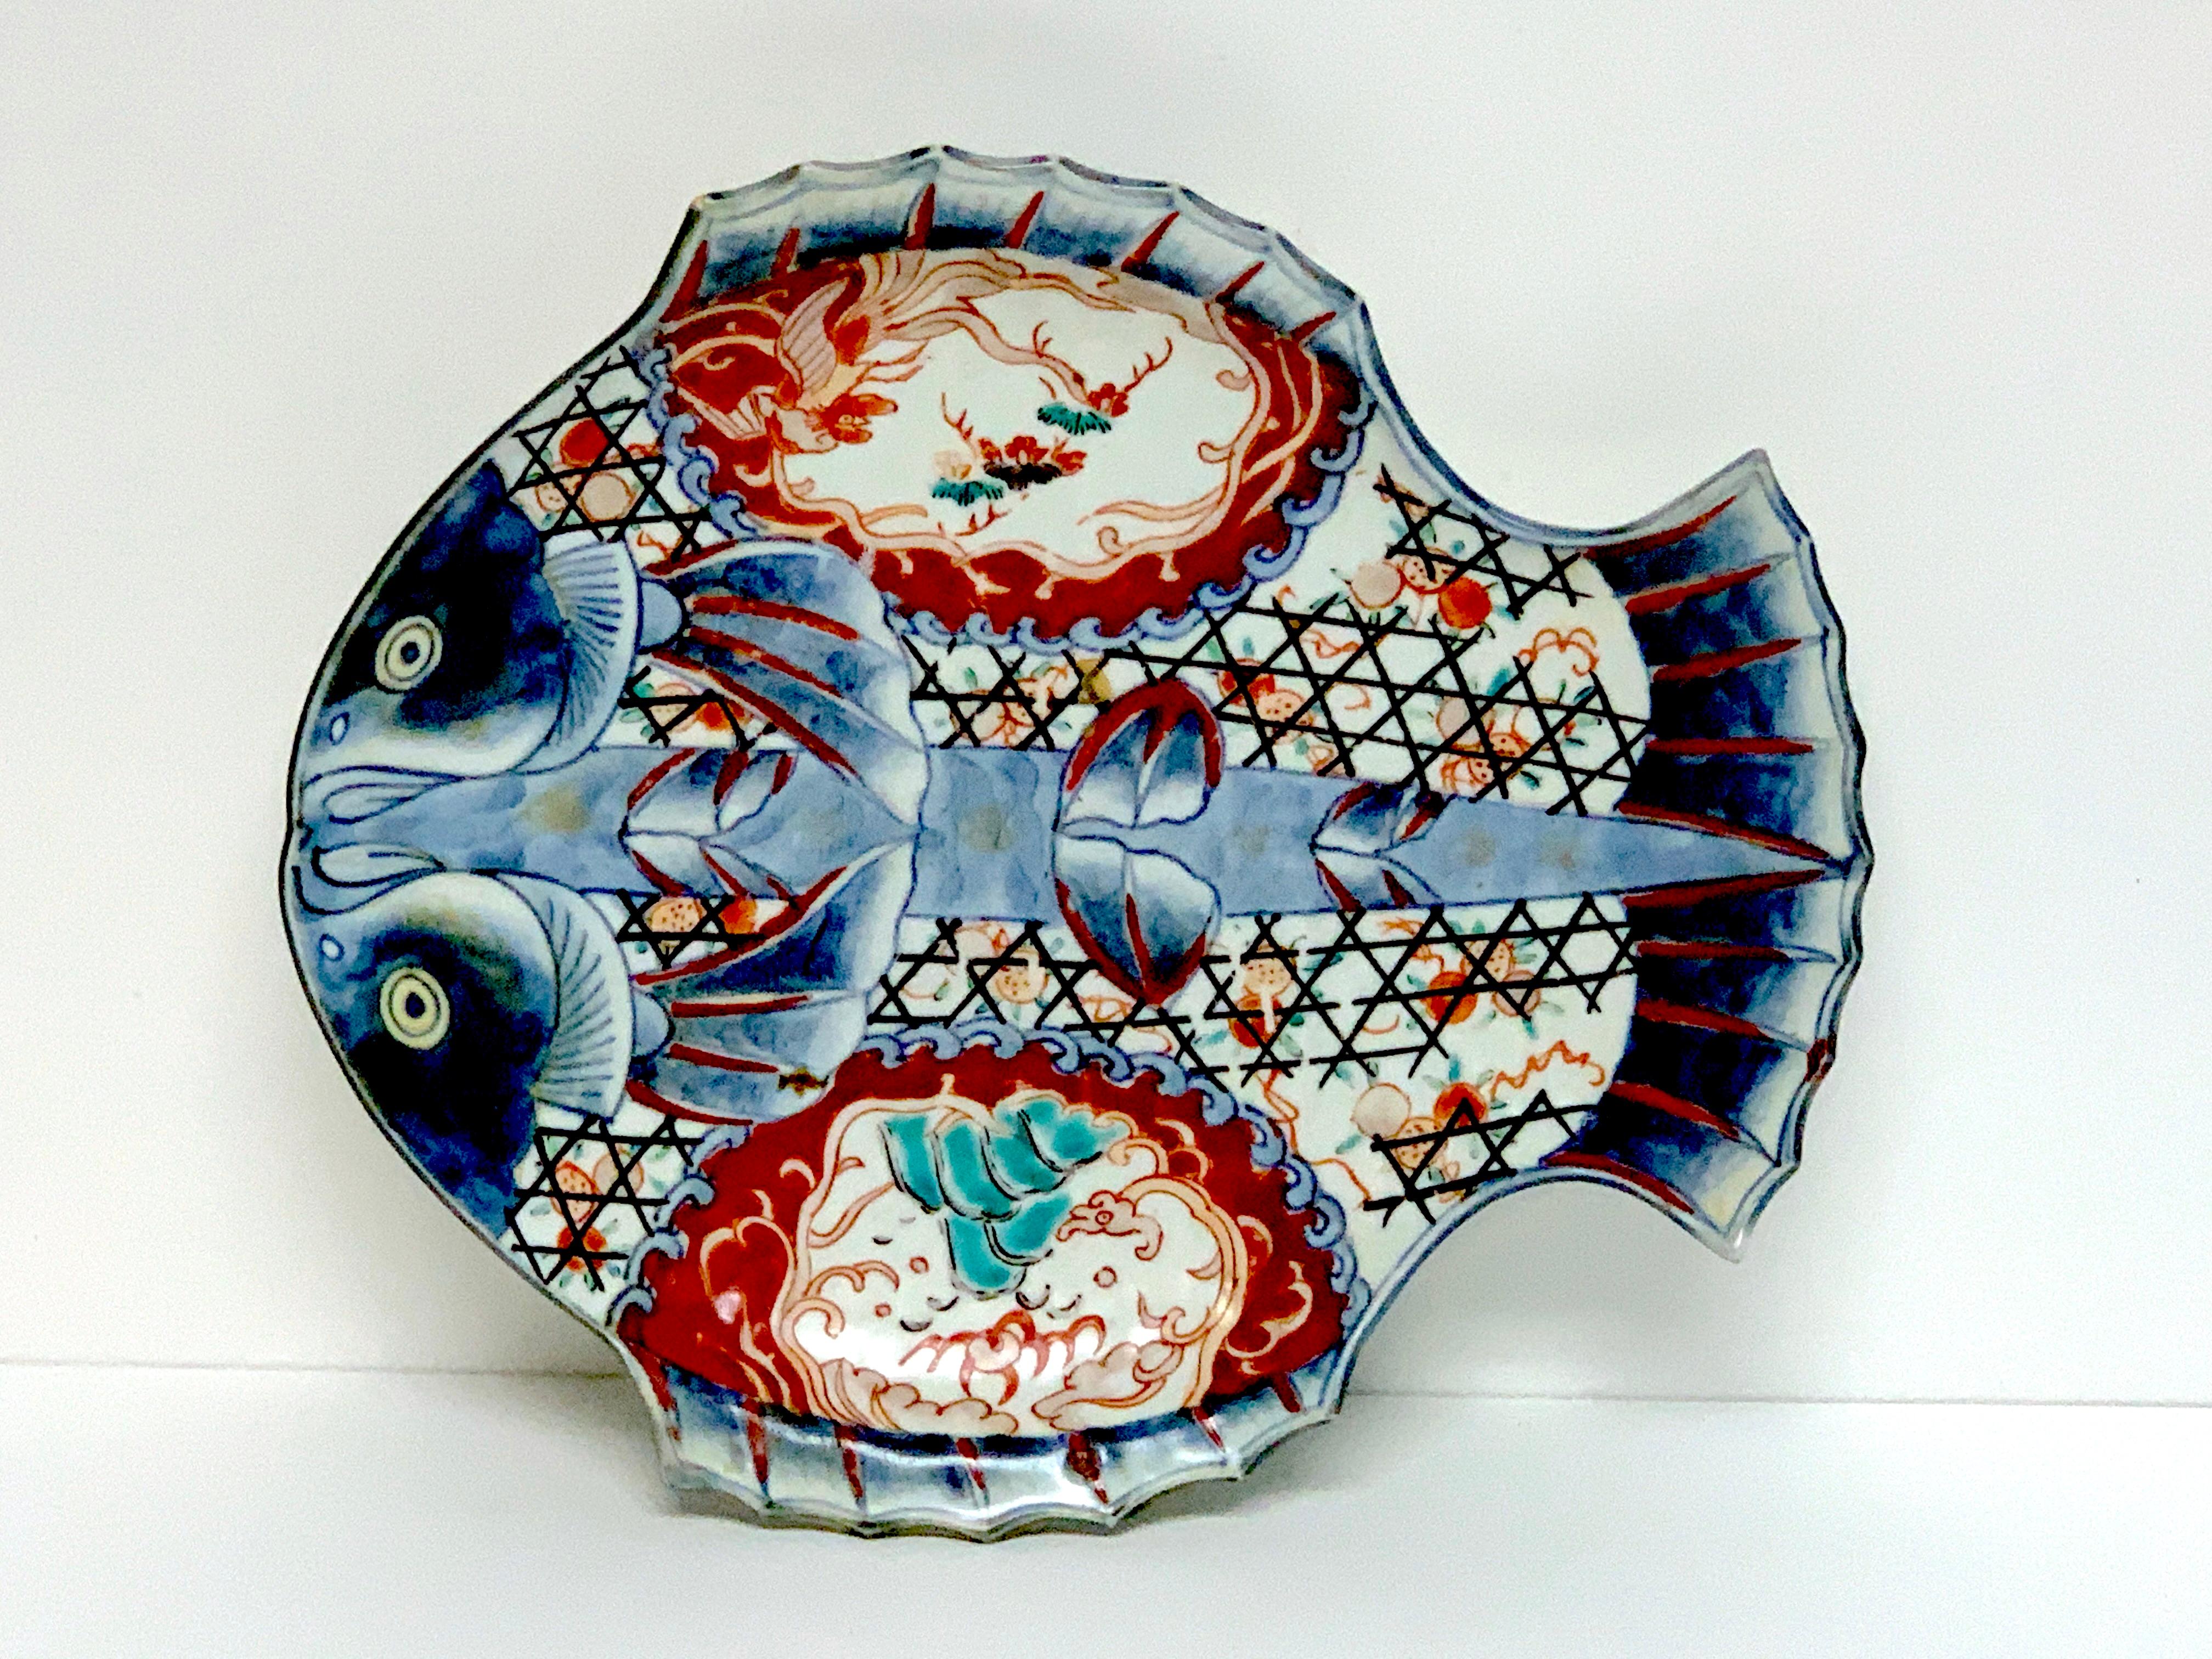 Meiji Imari fish plate I
A fine example, well decorated, unmarked, circa 1890
This examples measures 9-inches wide x 8-inches high.
Part of a collection of eight fine Imari examples, the I is for internal inventory purposes.